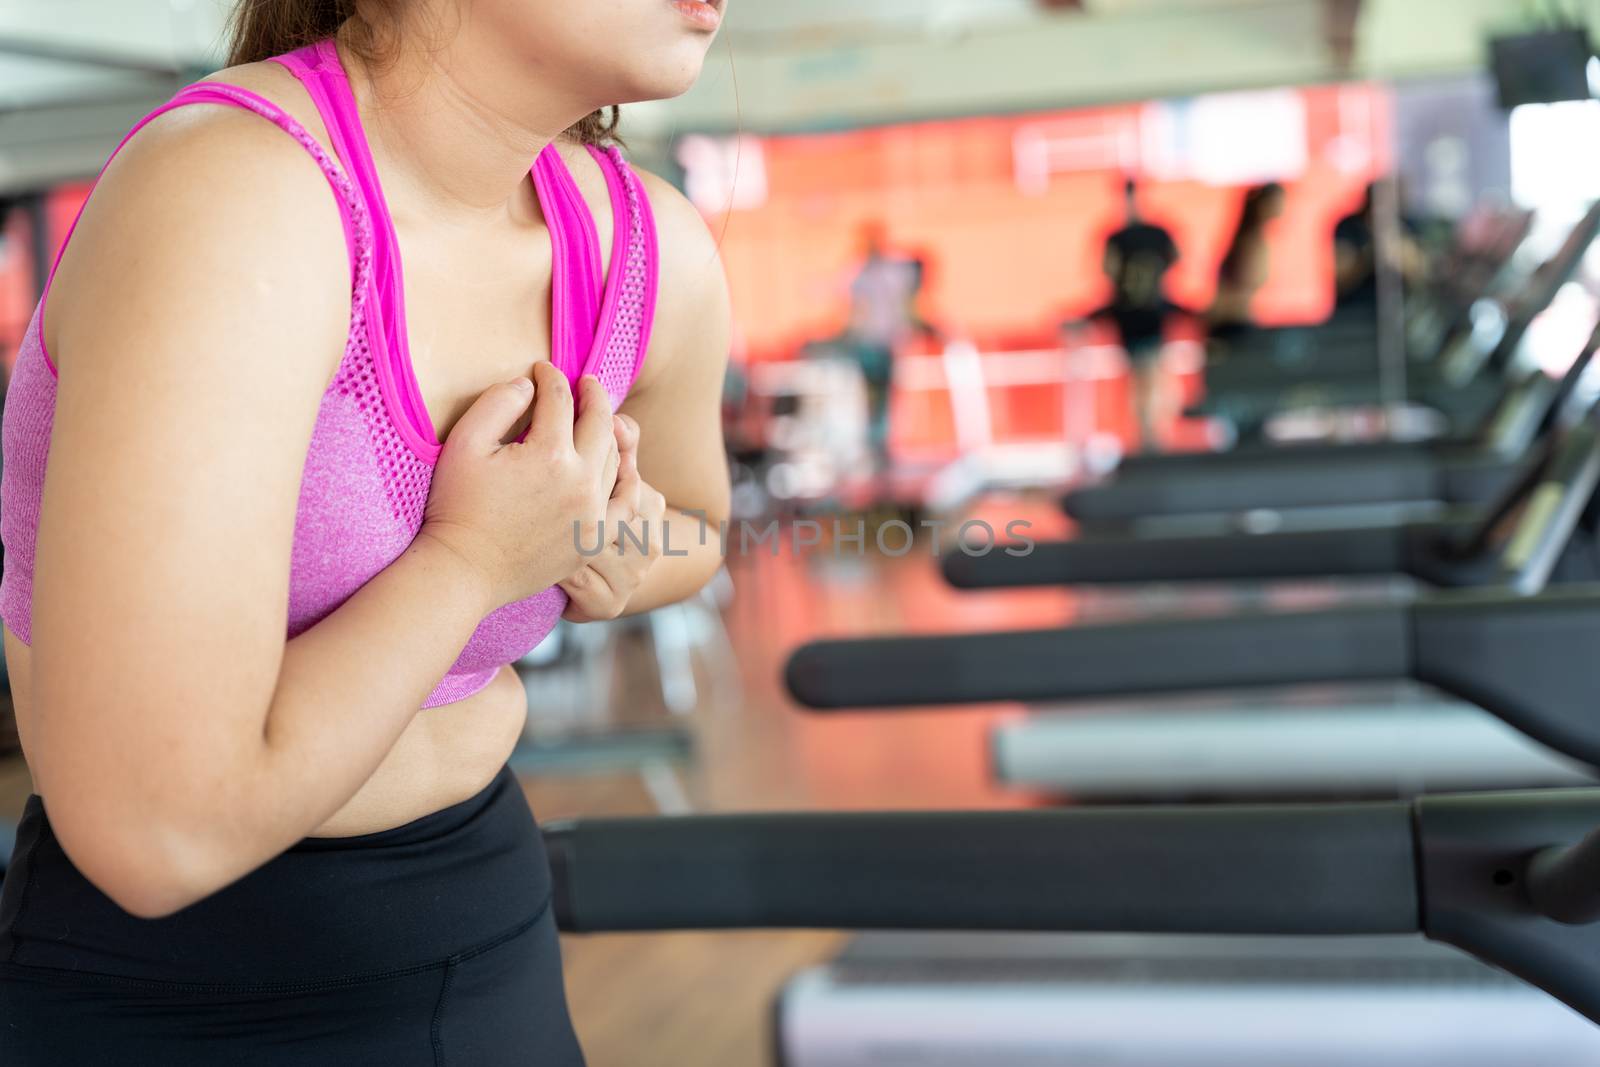 A woman feeling exhausted and suffering from heart pain and injury while running on treadmill at fitness gym. Sport, health care and medical concept.